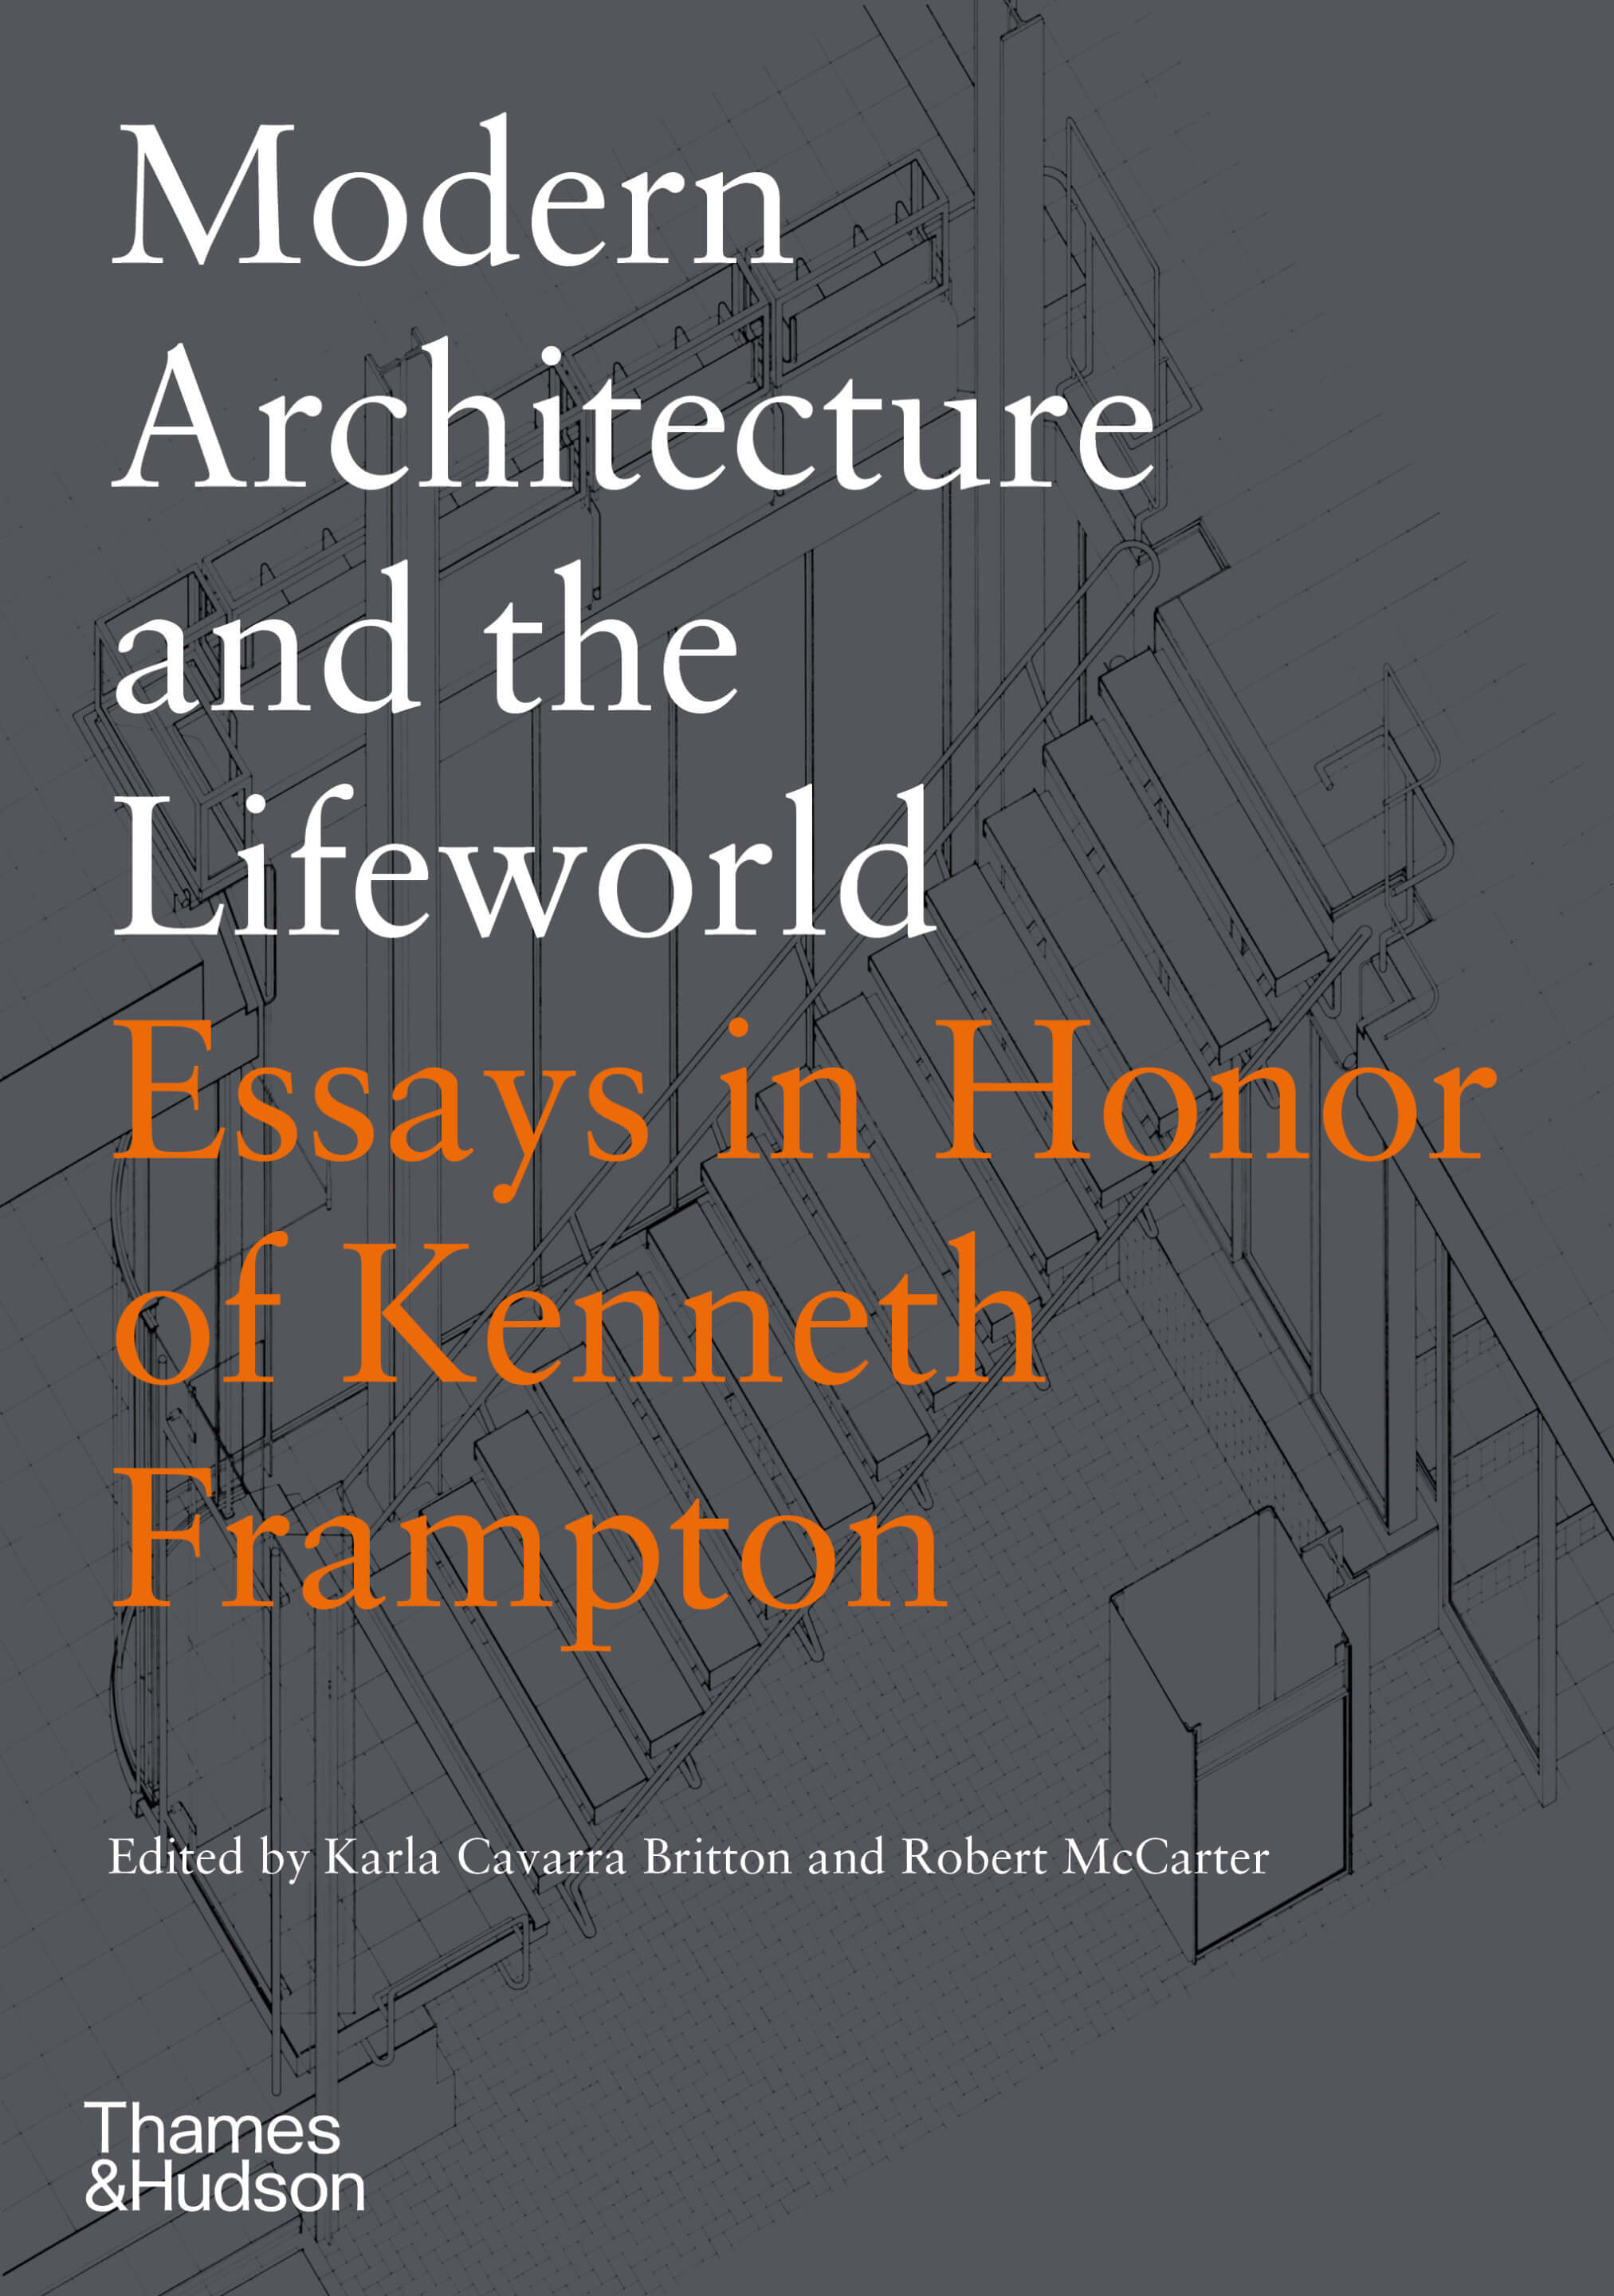 A book cover reading Modern architecture and the lifeworld; essays in honor of kenneth frampton